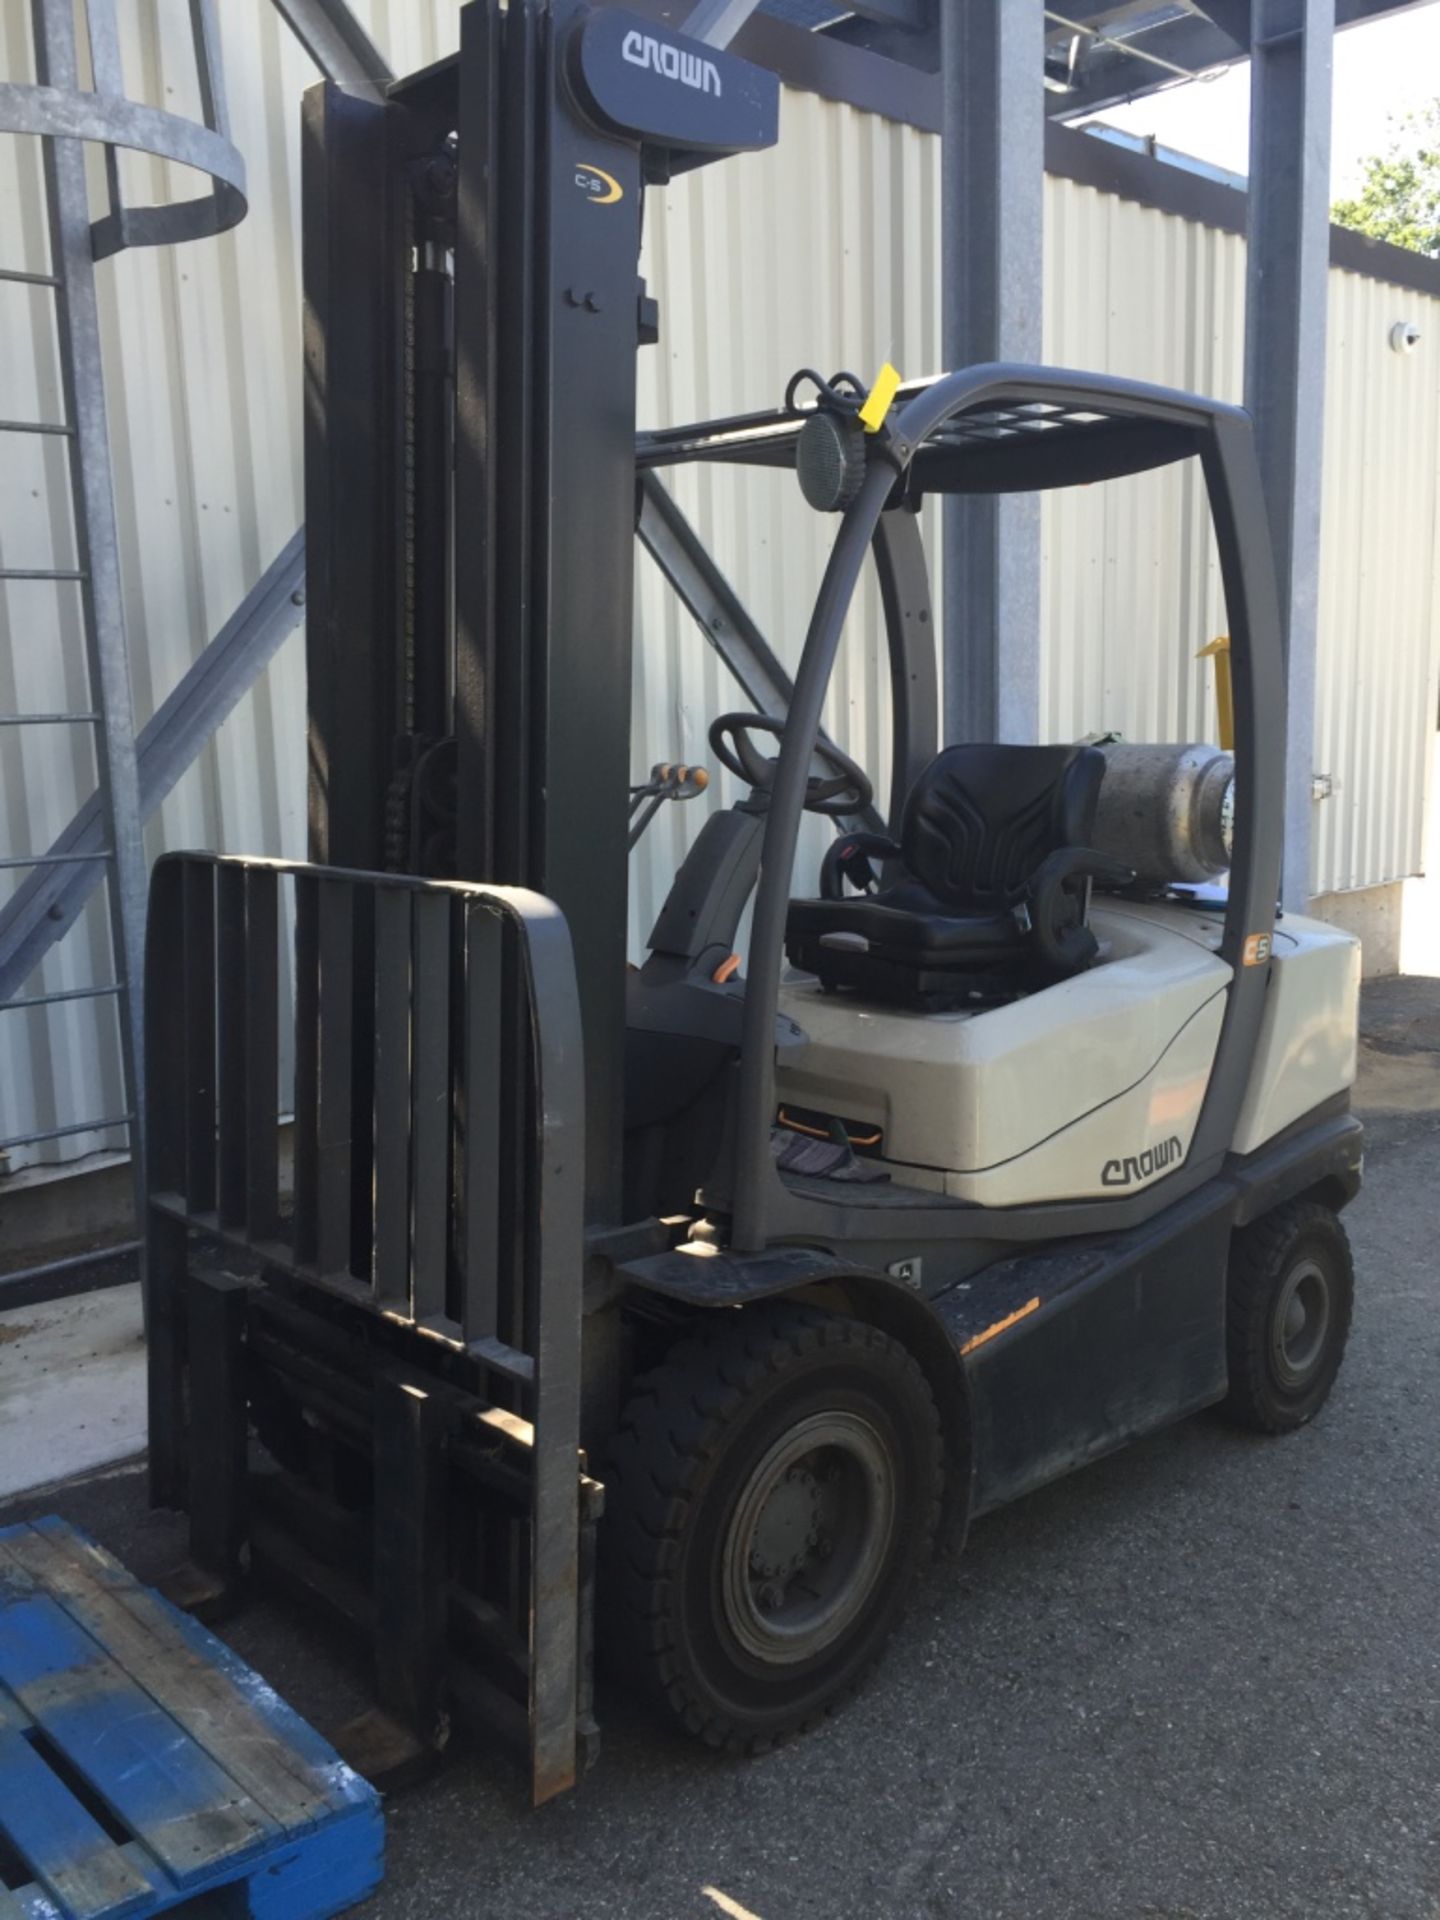 Crown Propane Fork Truck, Rigging Fee $75, If Crating or Lumber is Needed Add Additional $50